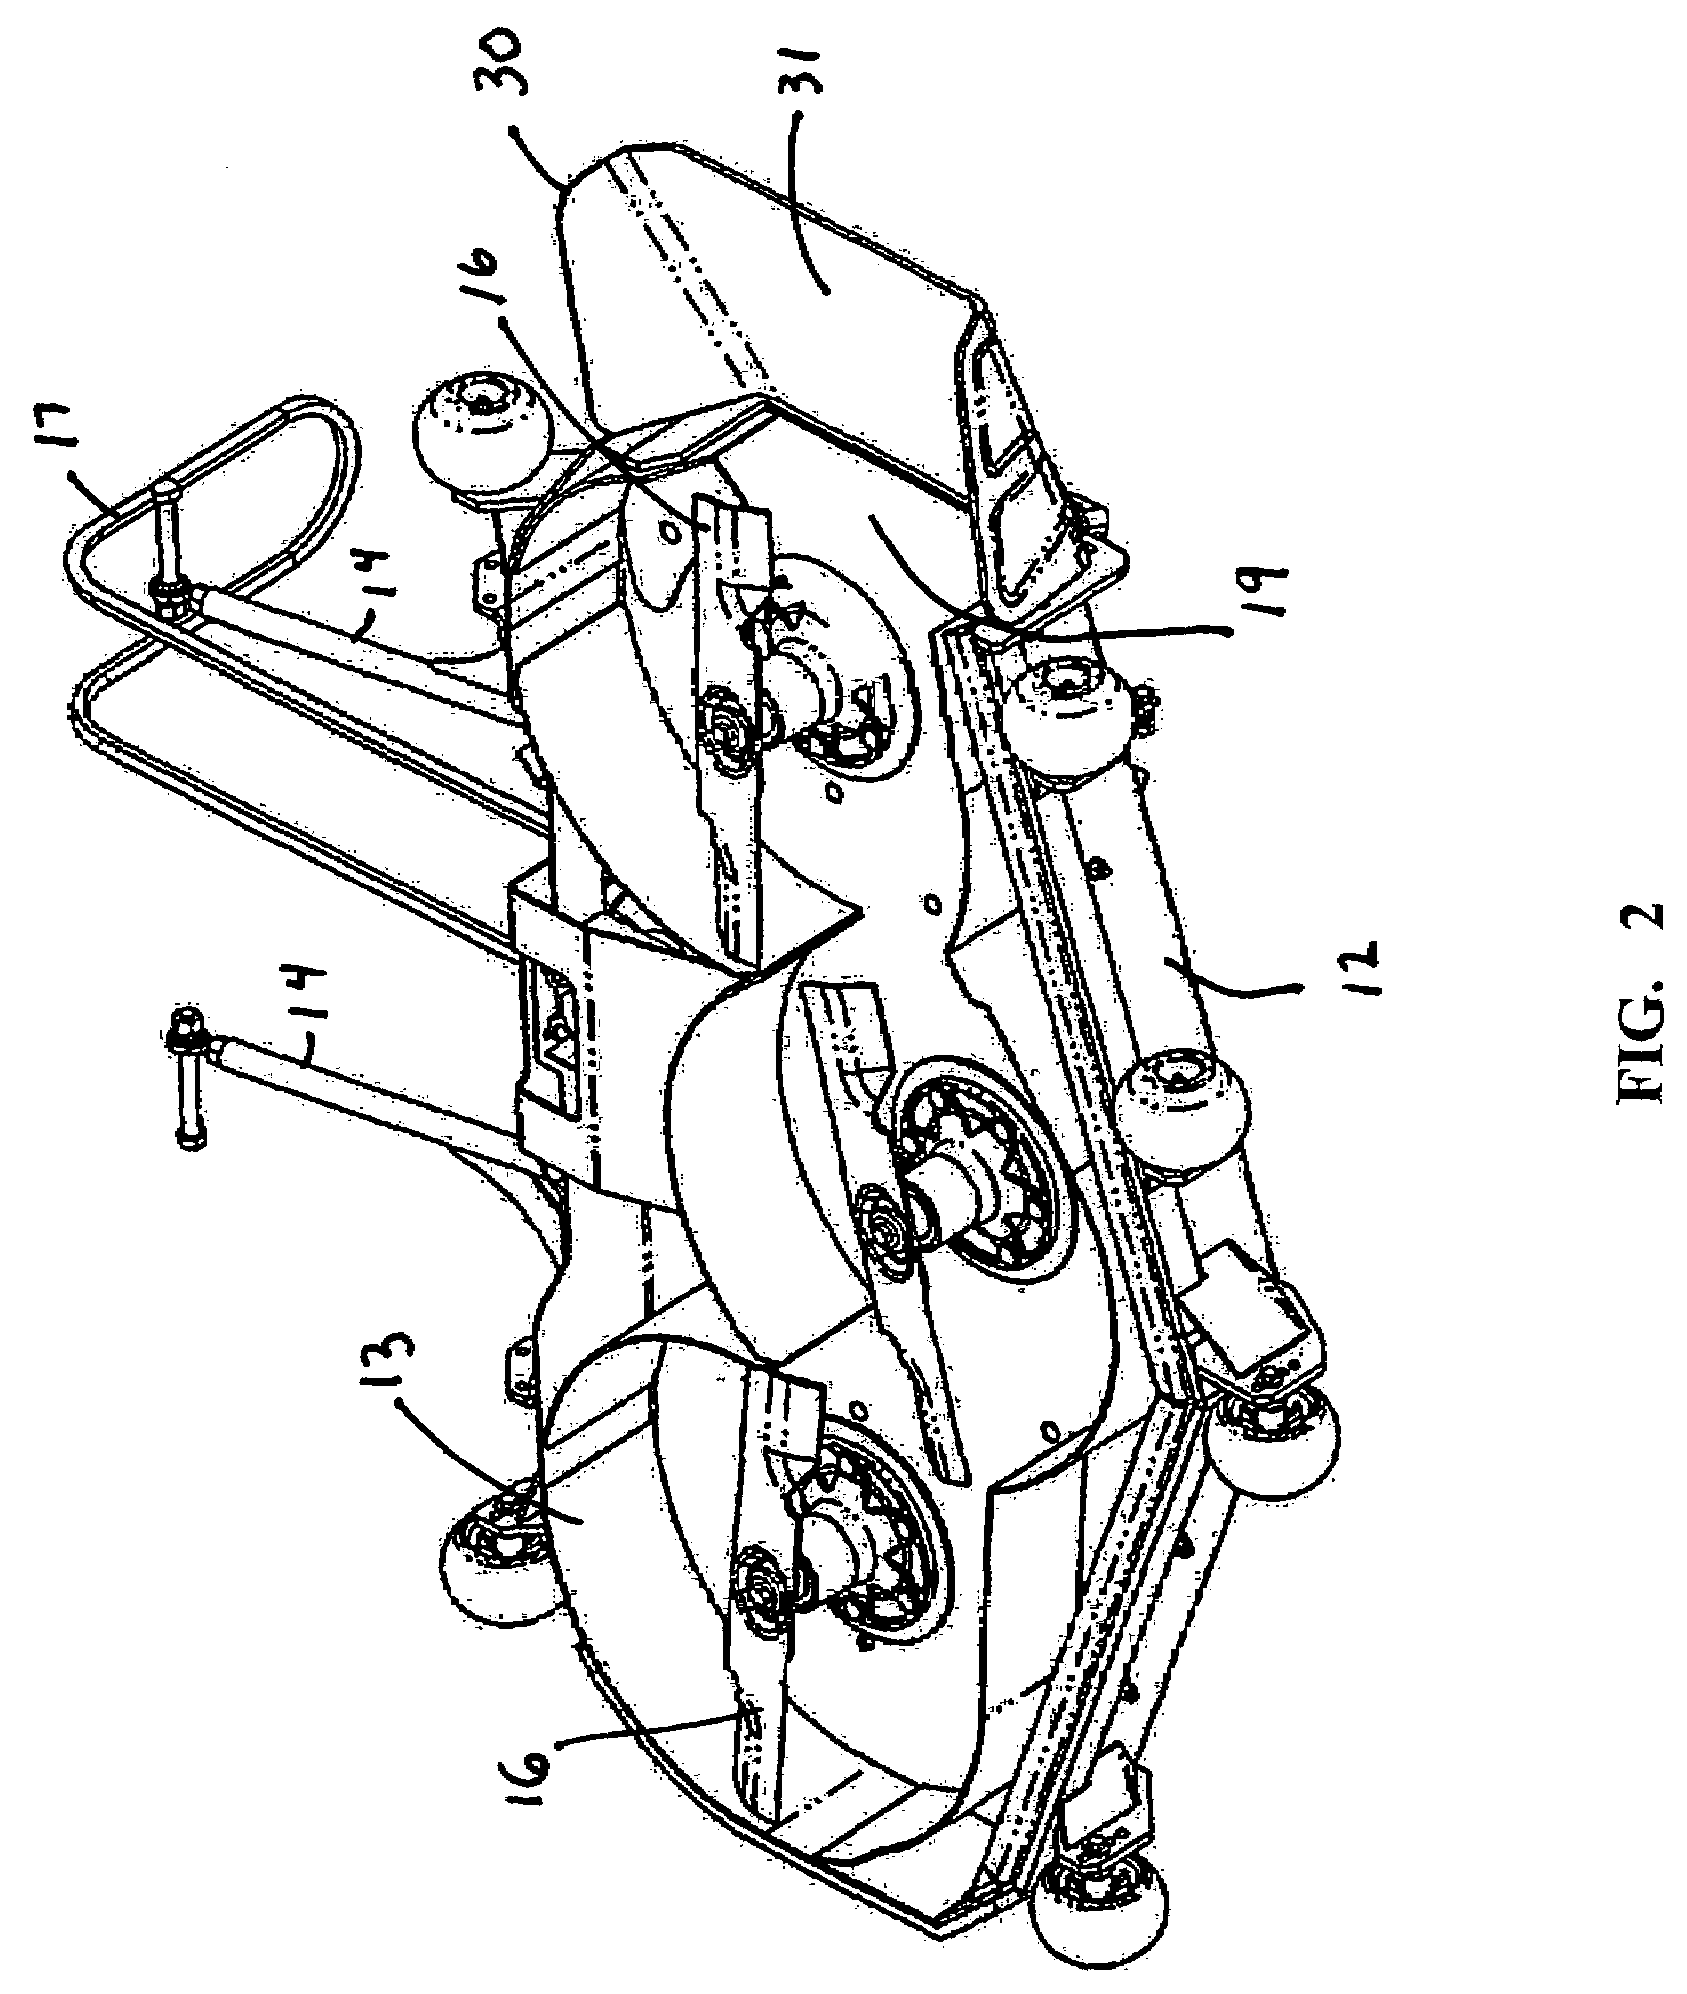 Discharge chute for turf mower